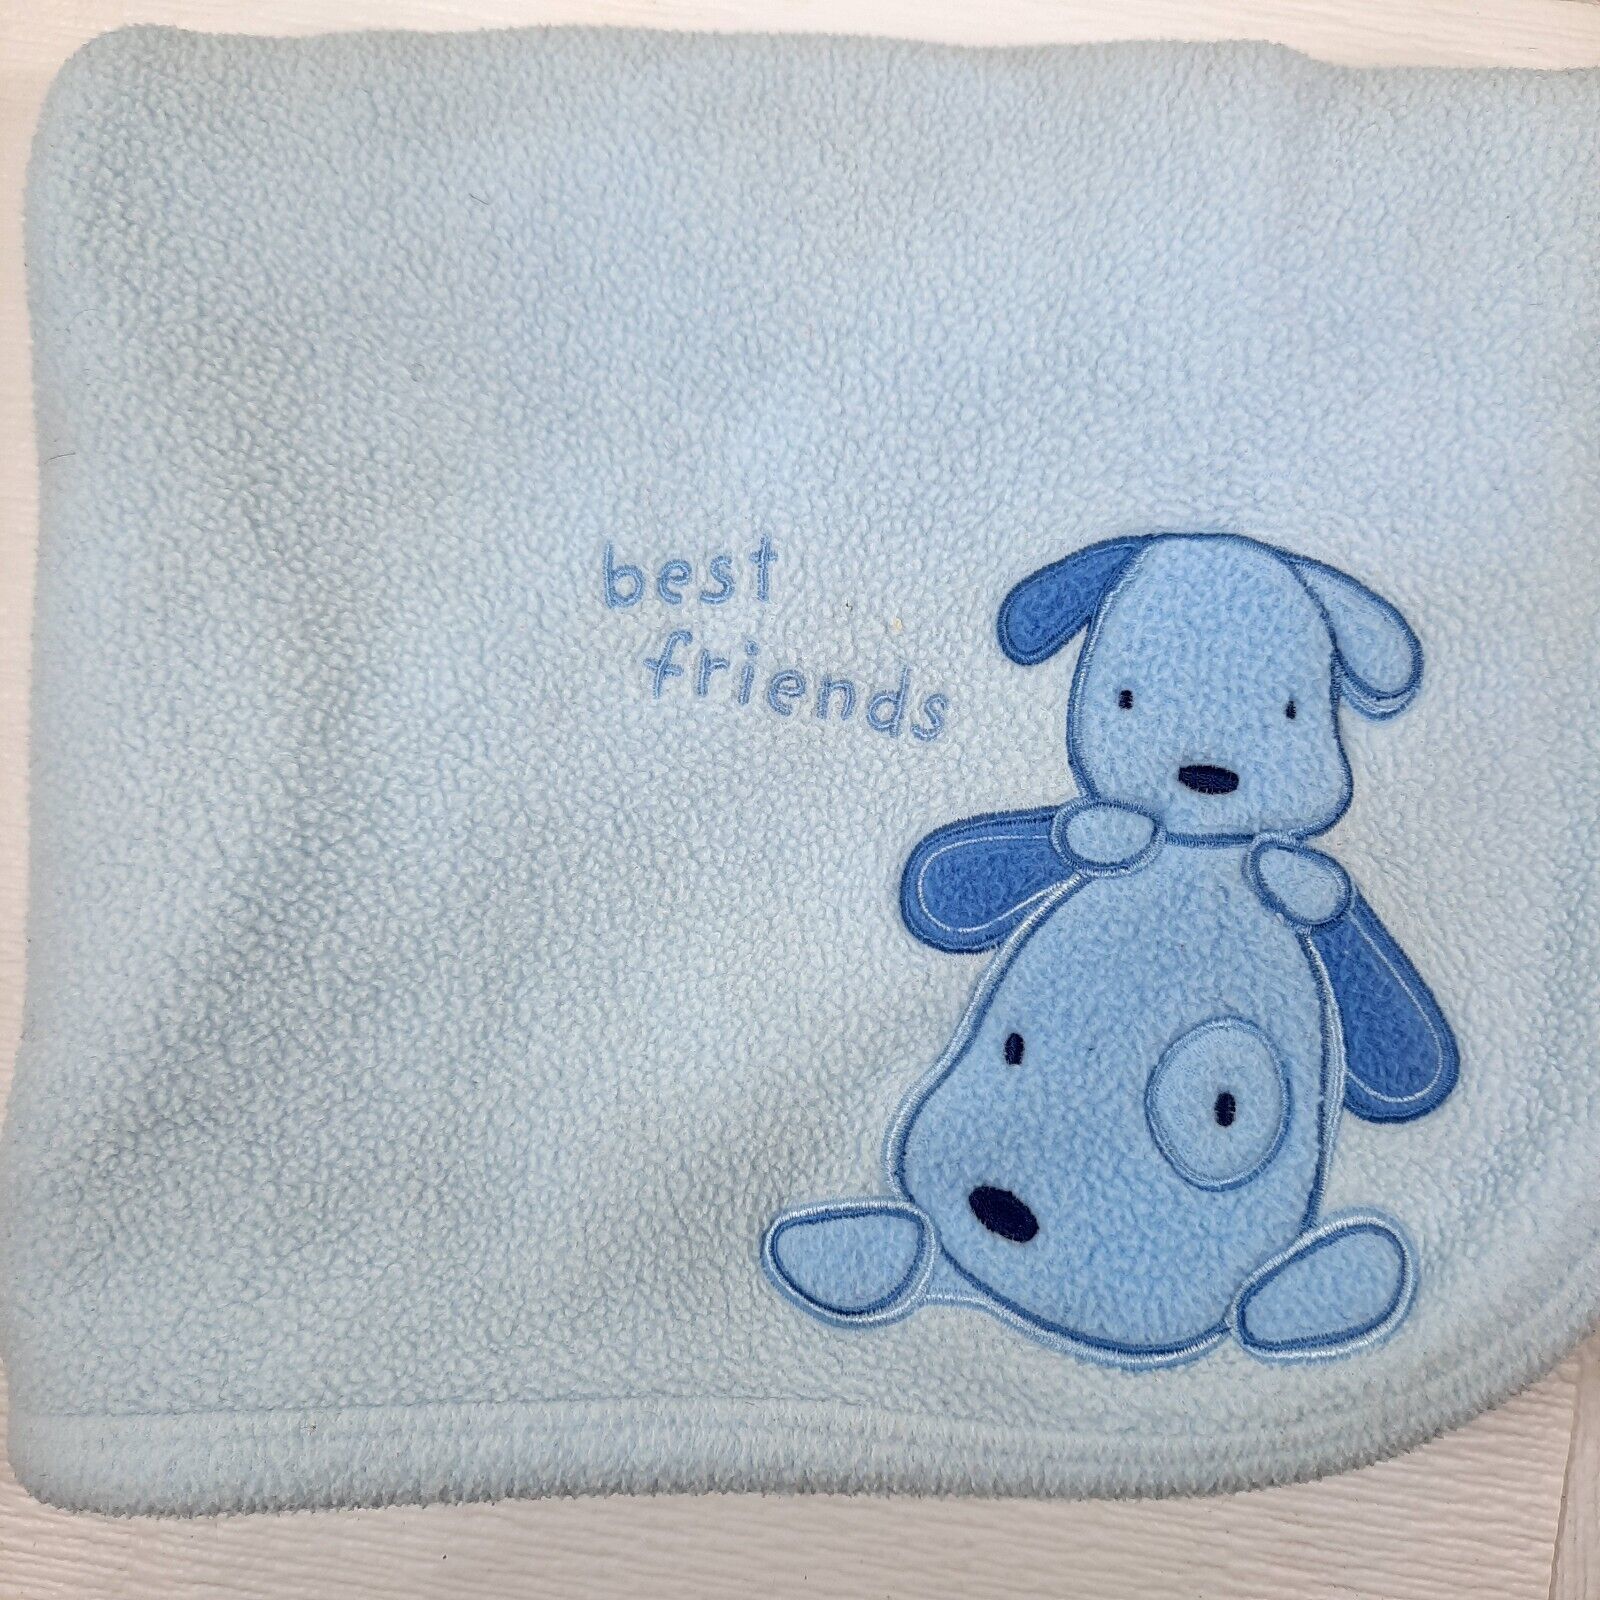 Primary image for Carter's Just One Year best friends Puppy Dog Baby Blanket Blue Fleece Vintage